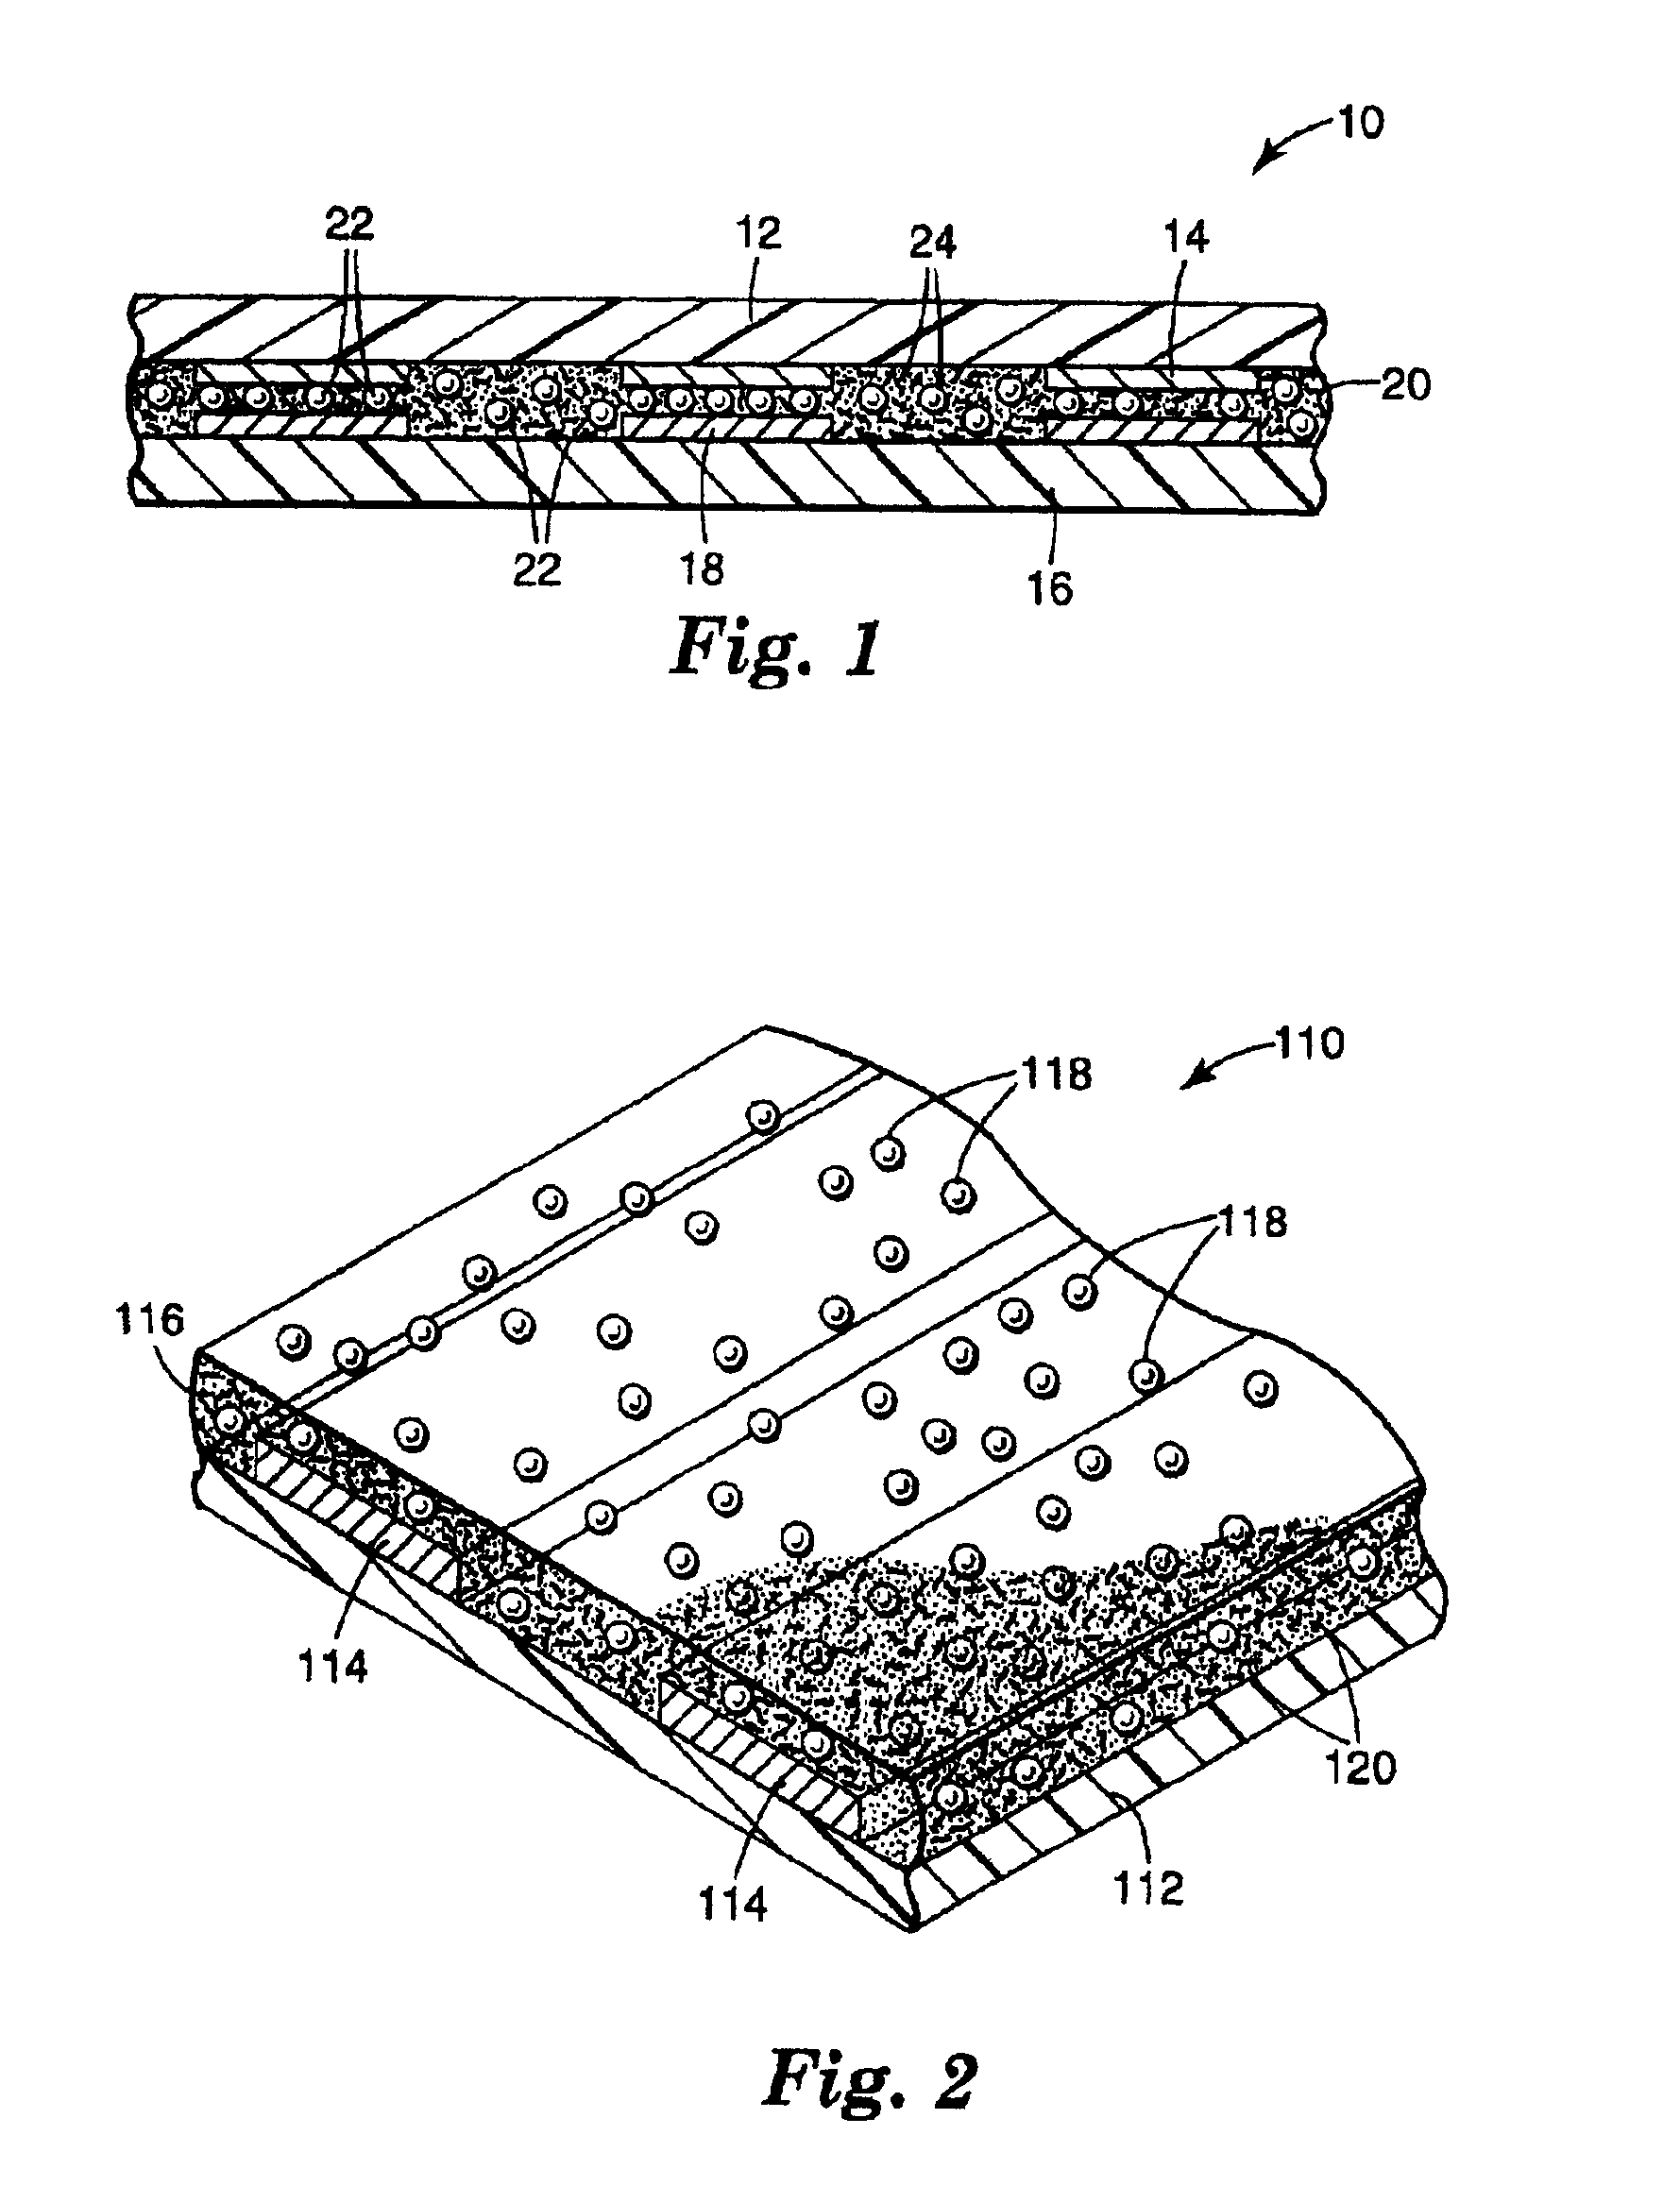 Devices, compositions, and methods incorporating adhesives whose performance is enhanced by organophilic clay constituents